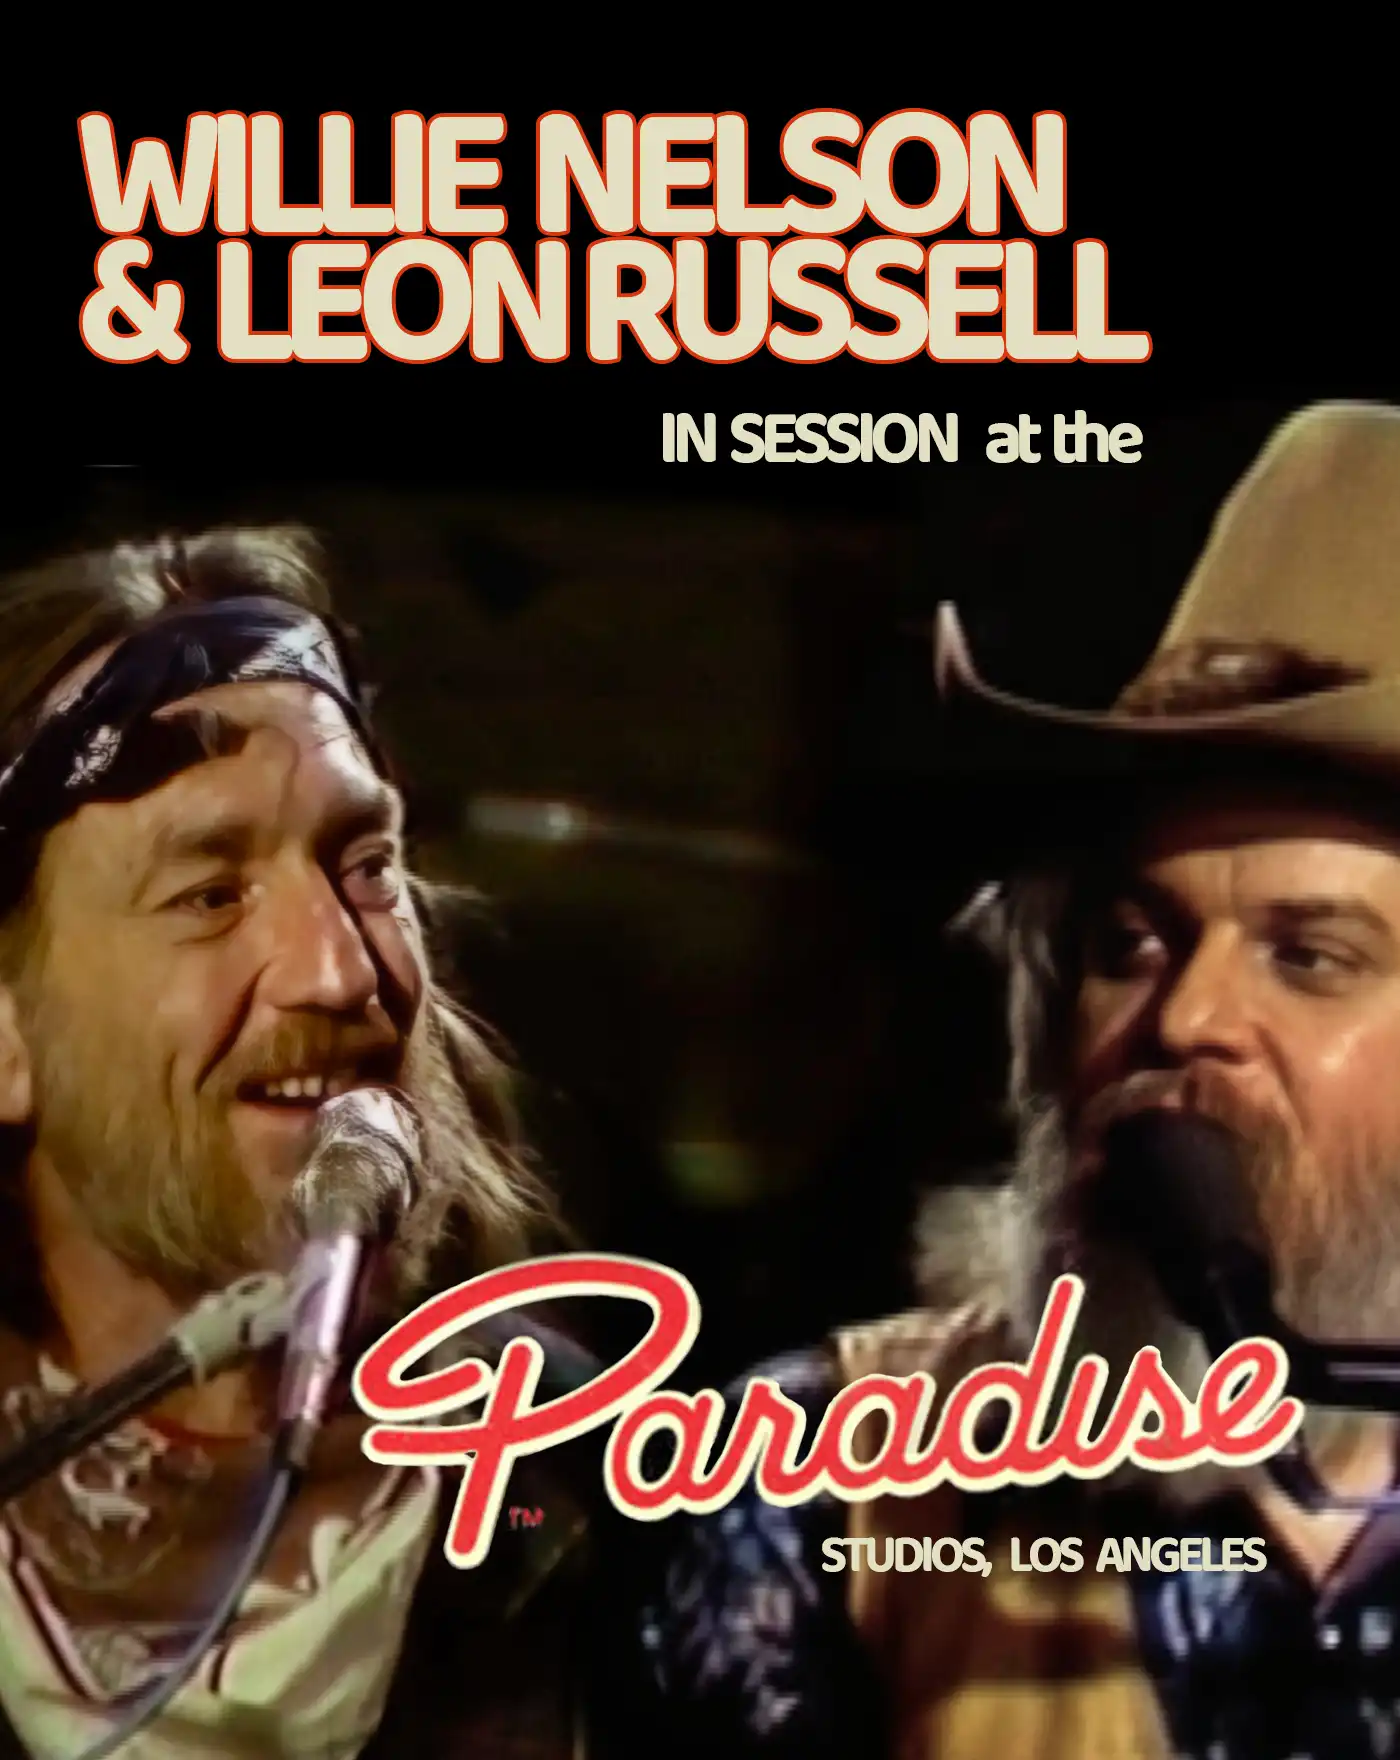 Willie Nelson & Leon Russell in Session at the Paradise Studios